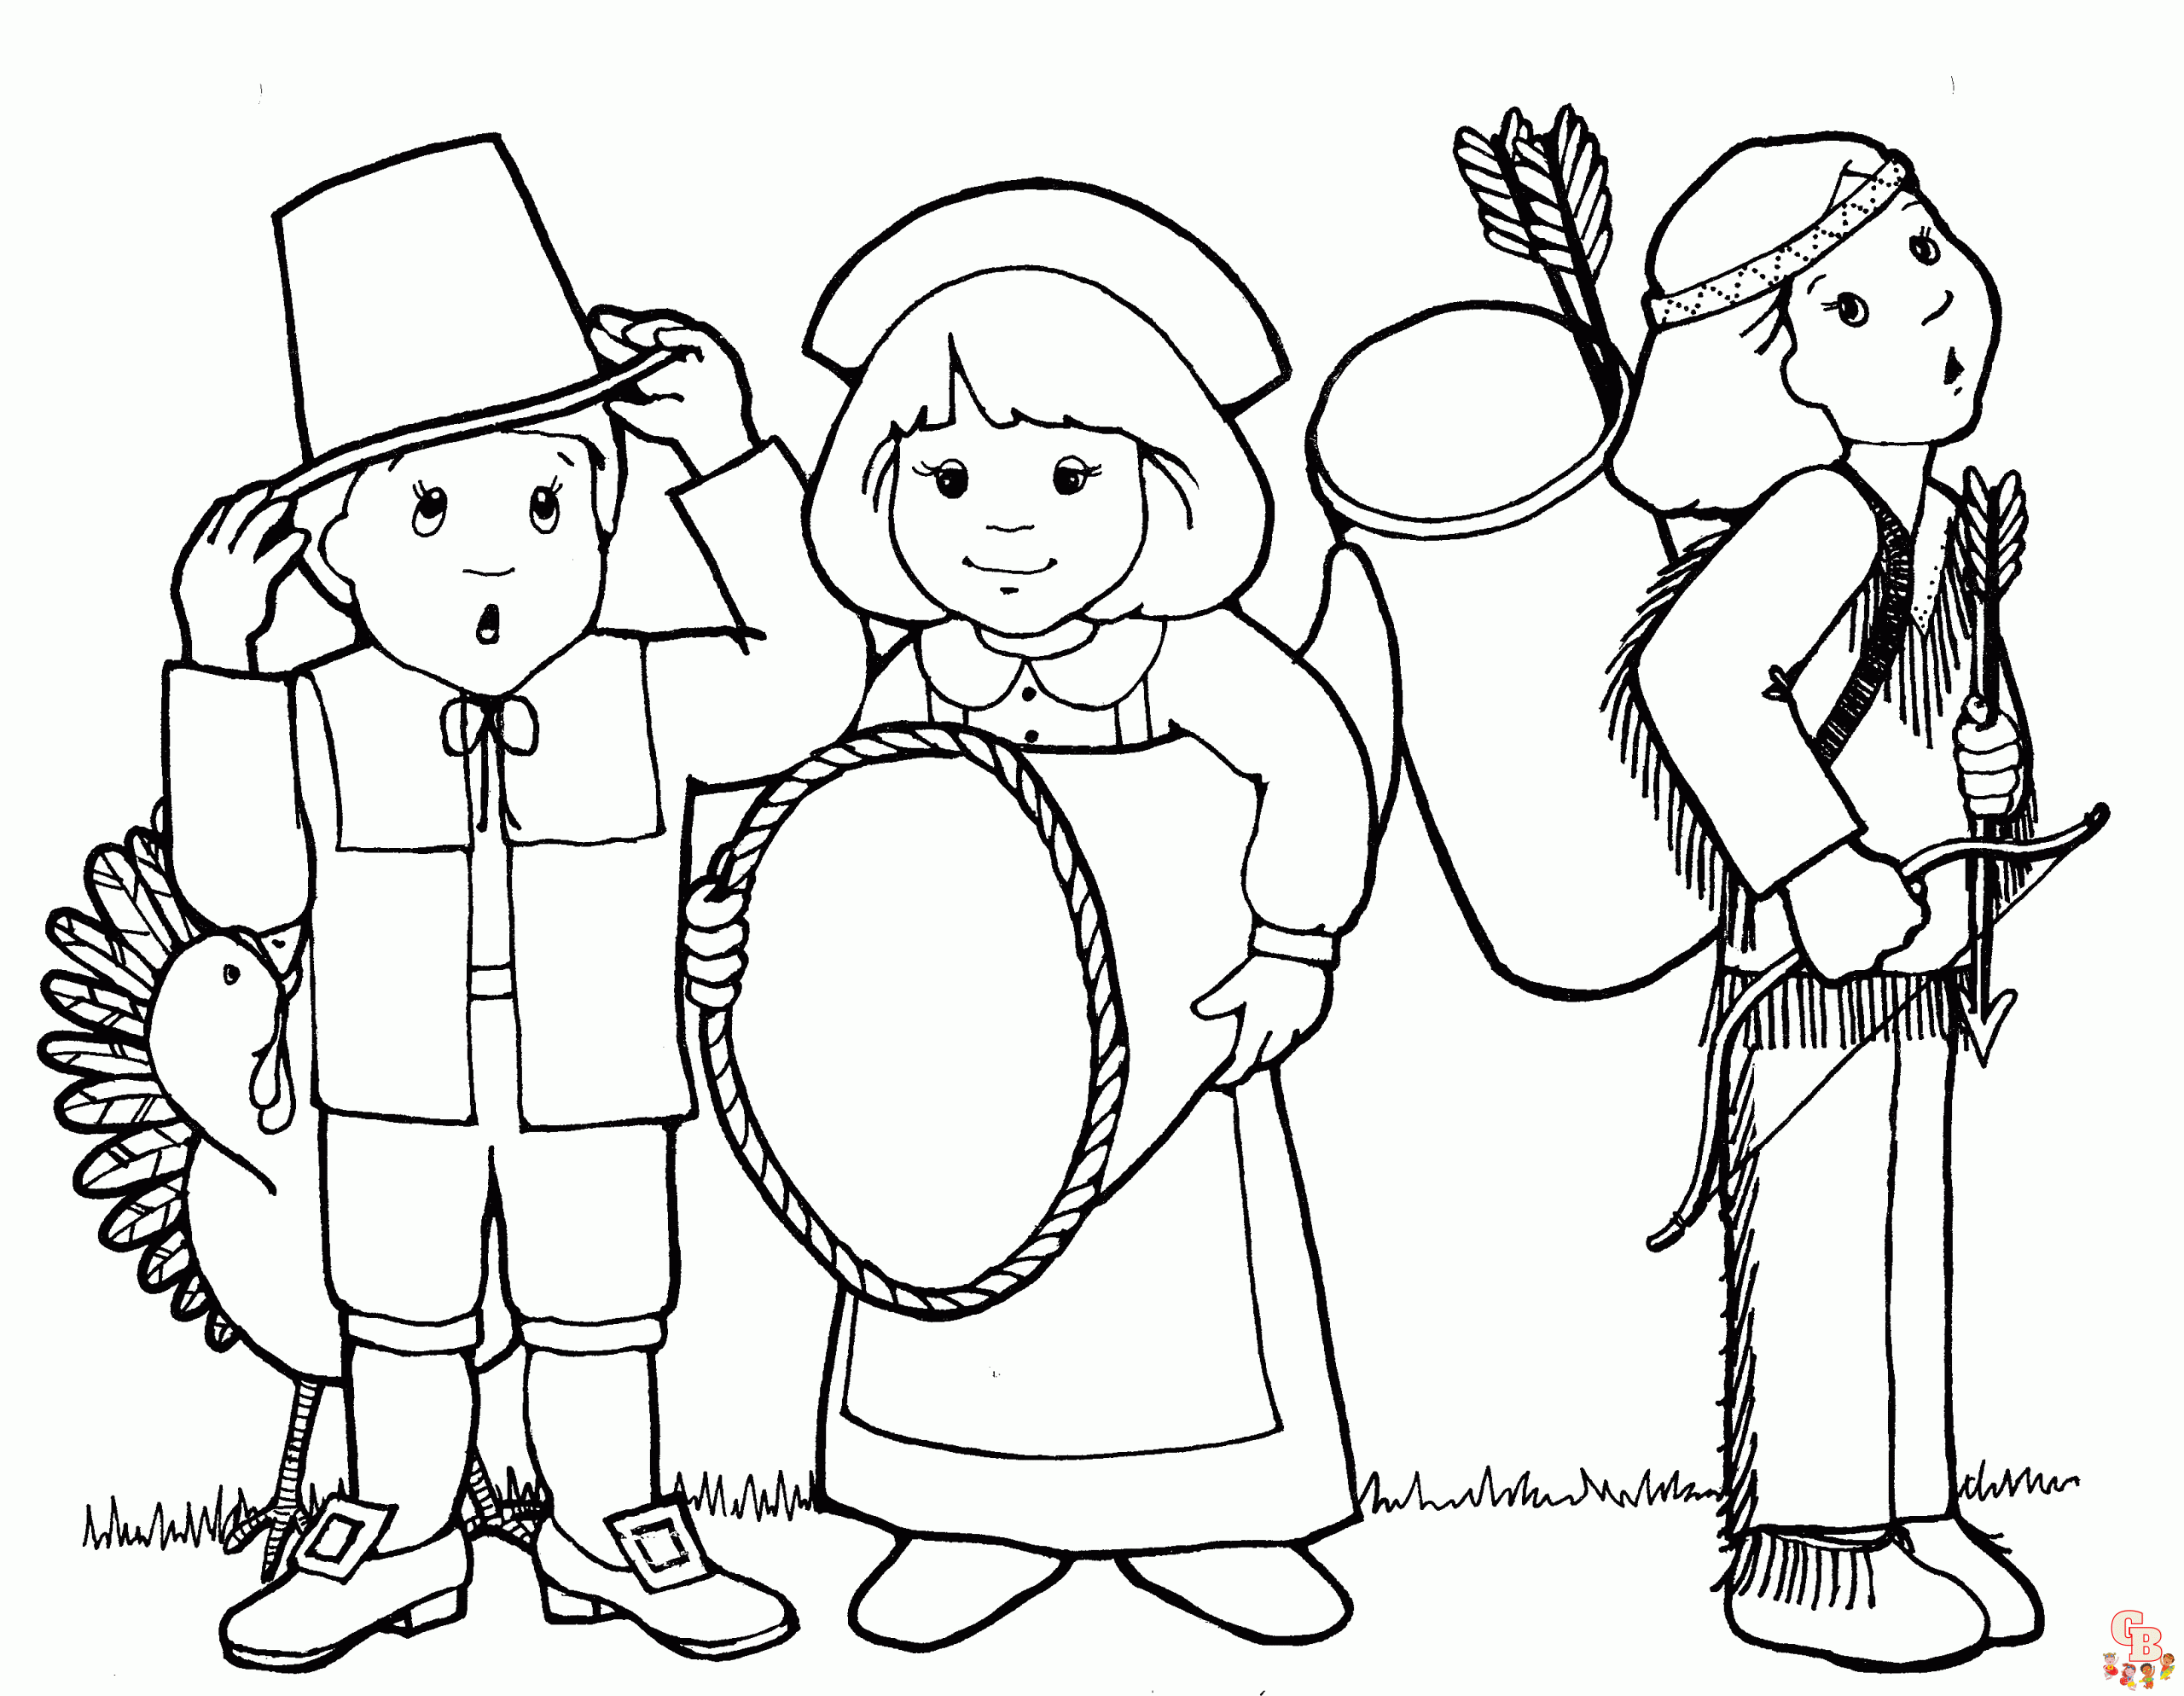 Printable pilgrim coloring pages free for kids and adults